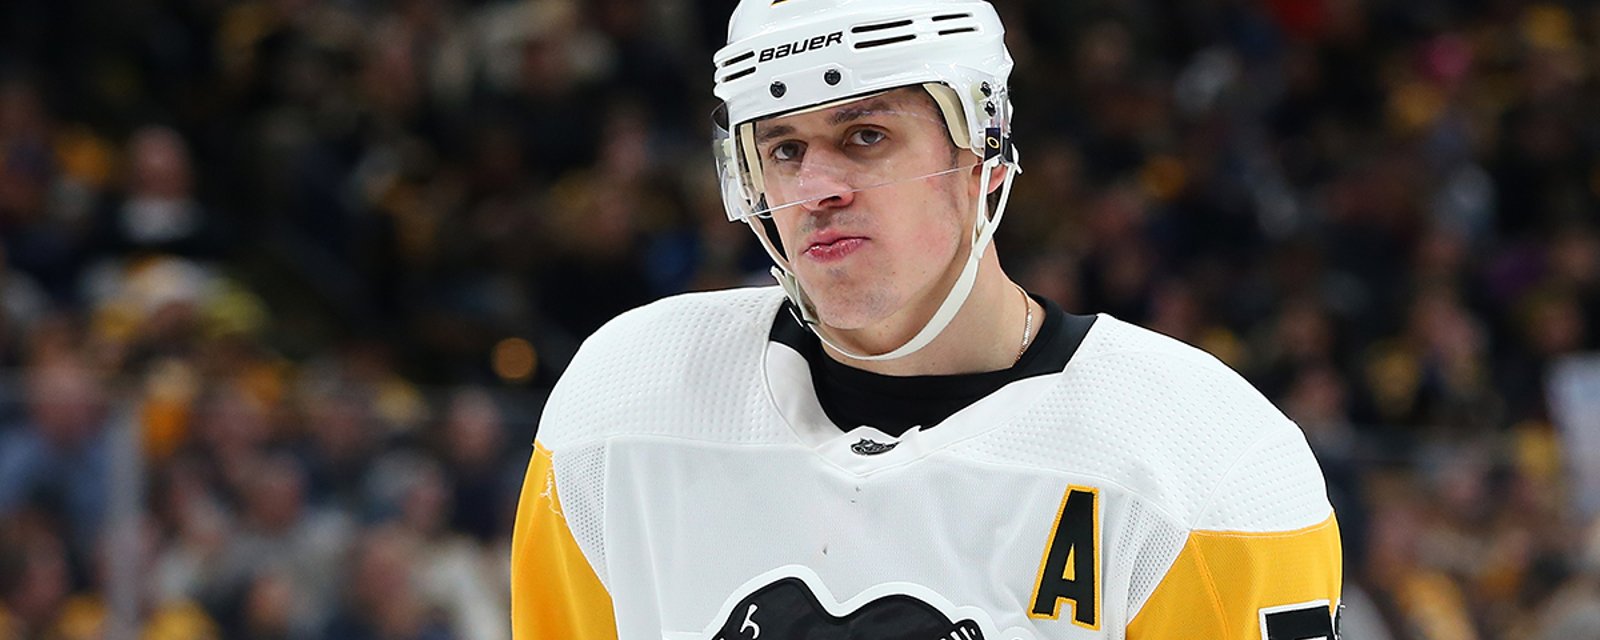 Report: Malkin trade rumors are true, Panthers in pursuit